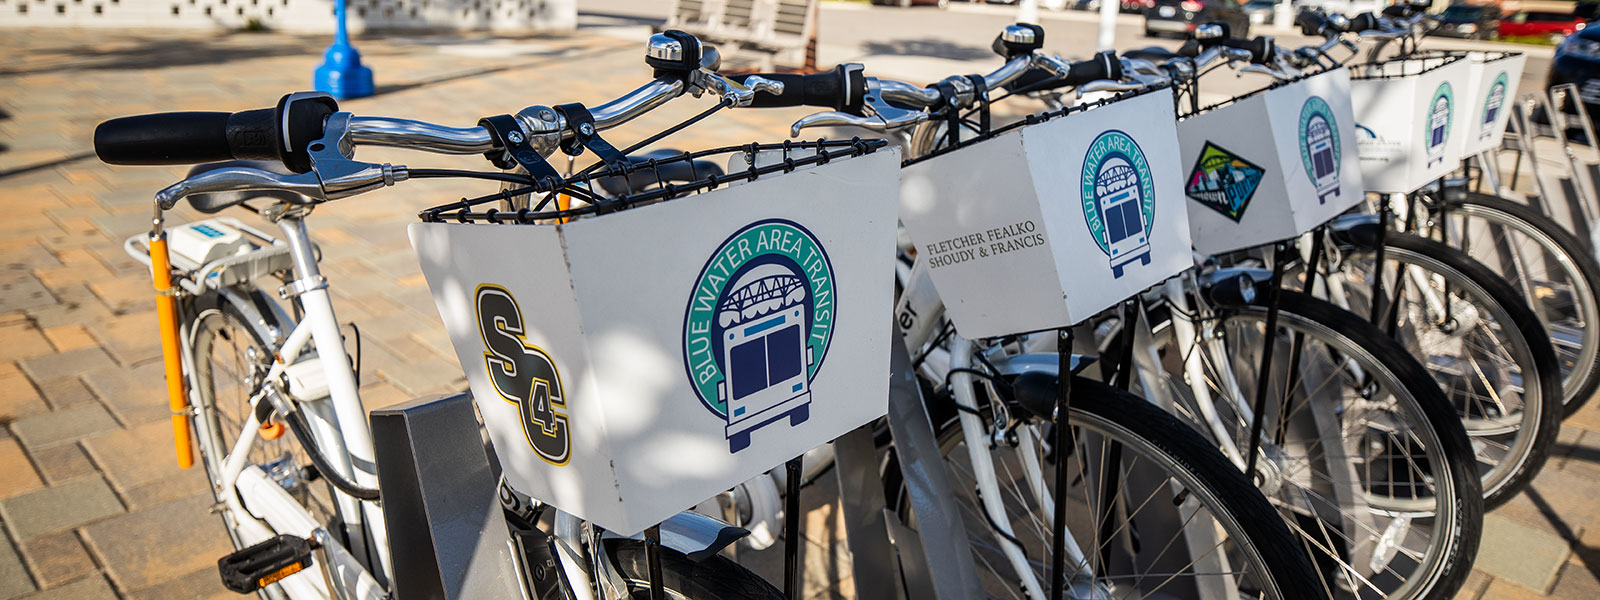 In addition to becoming more walkable, Port Huron is improving its bikeability.